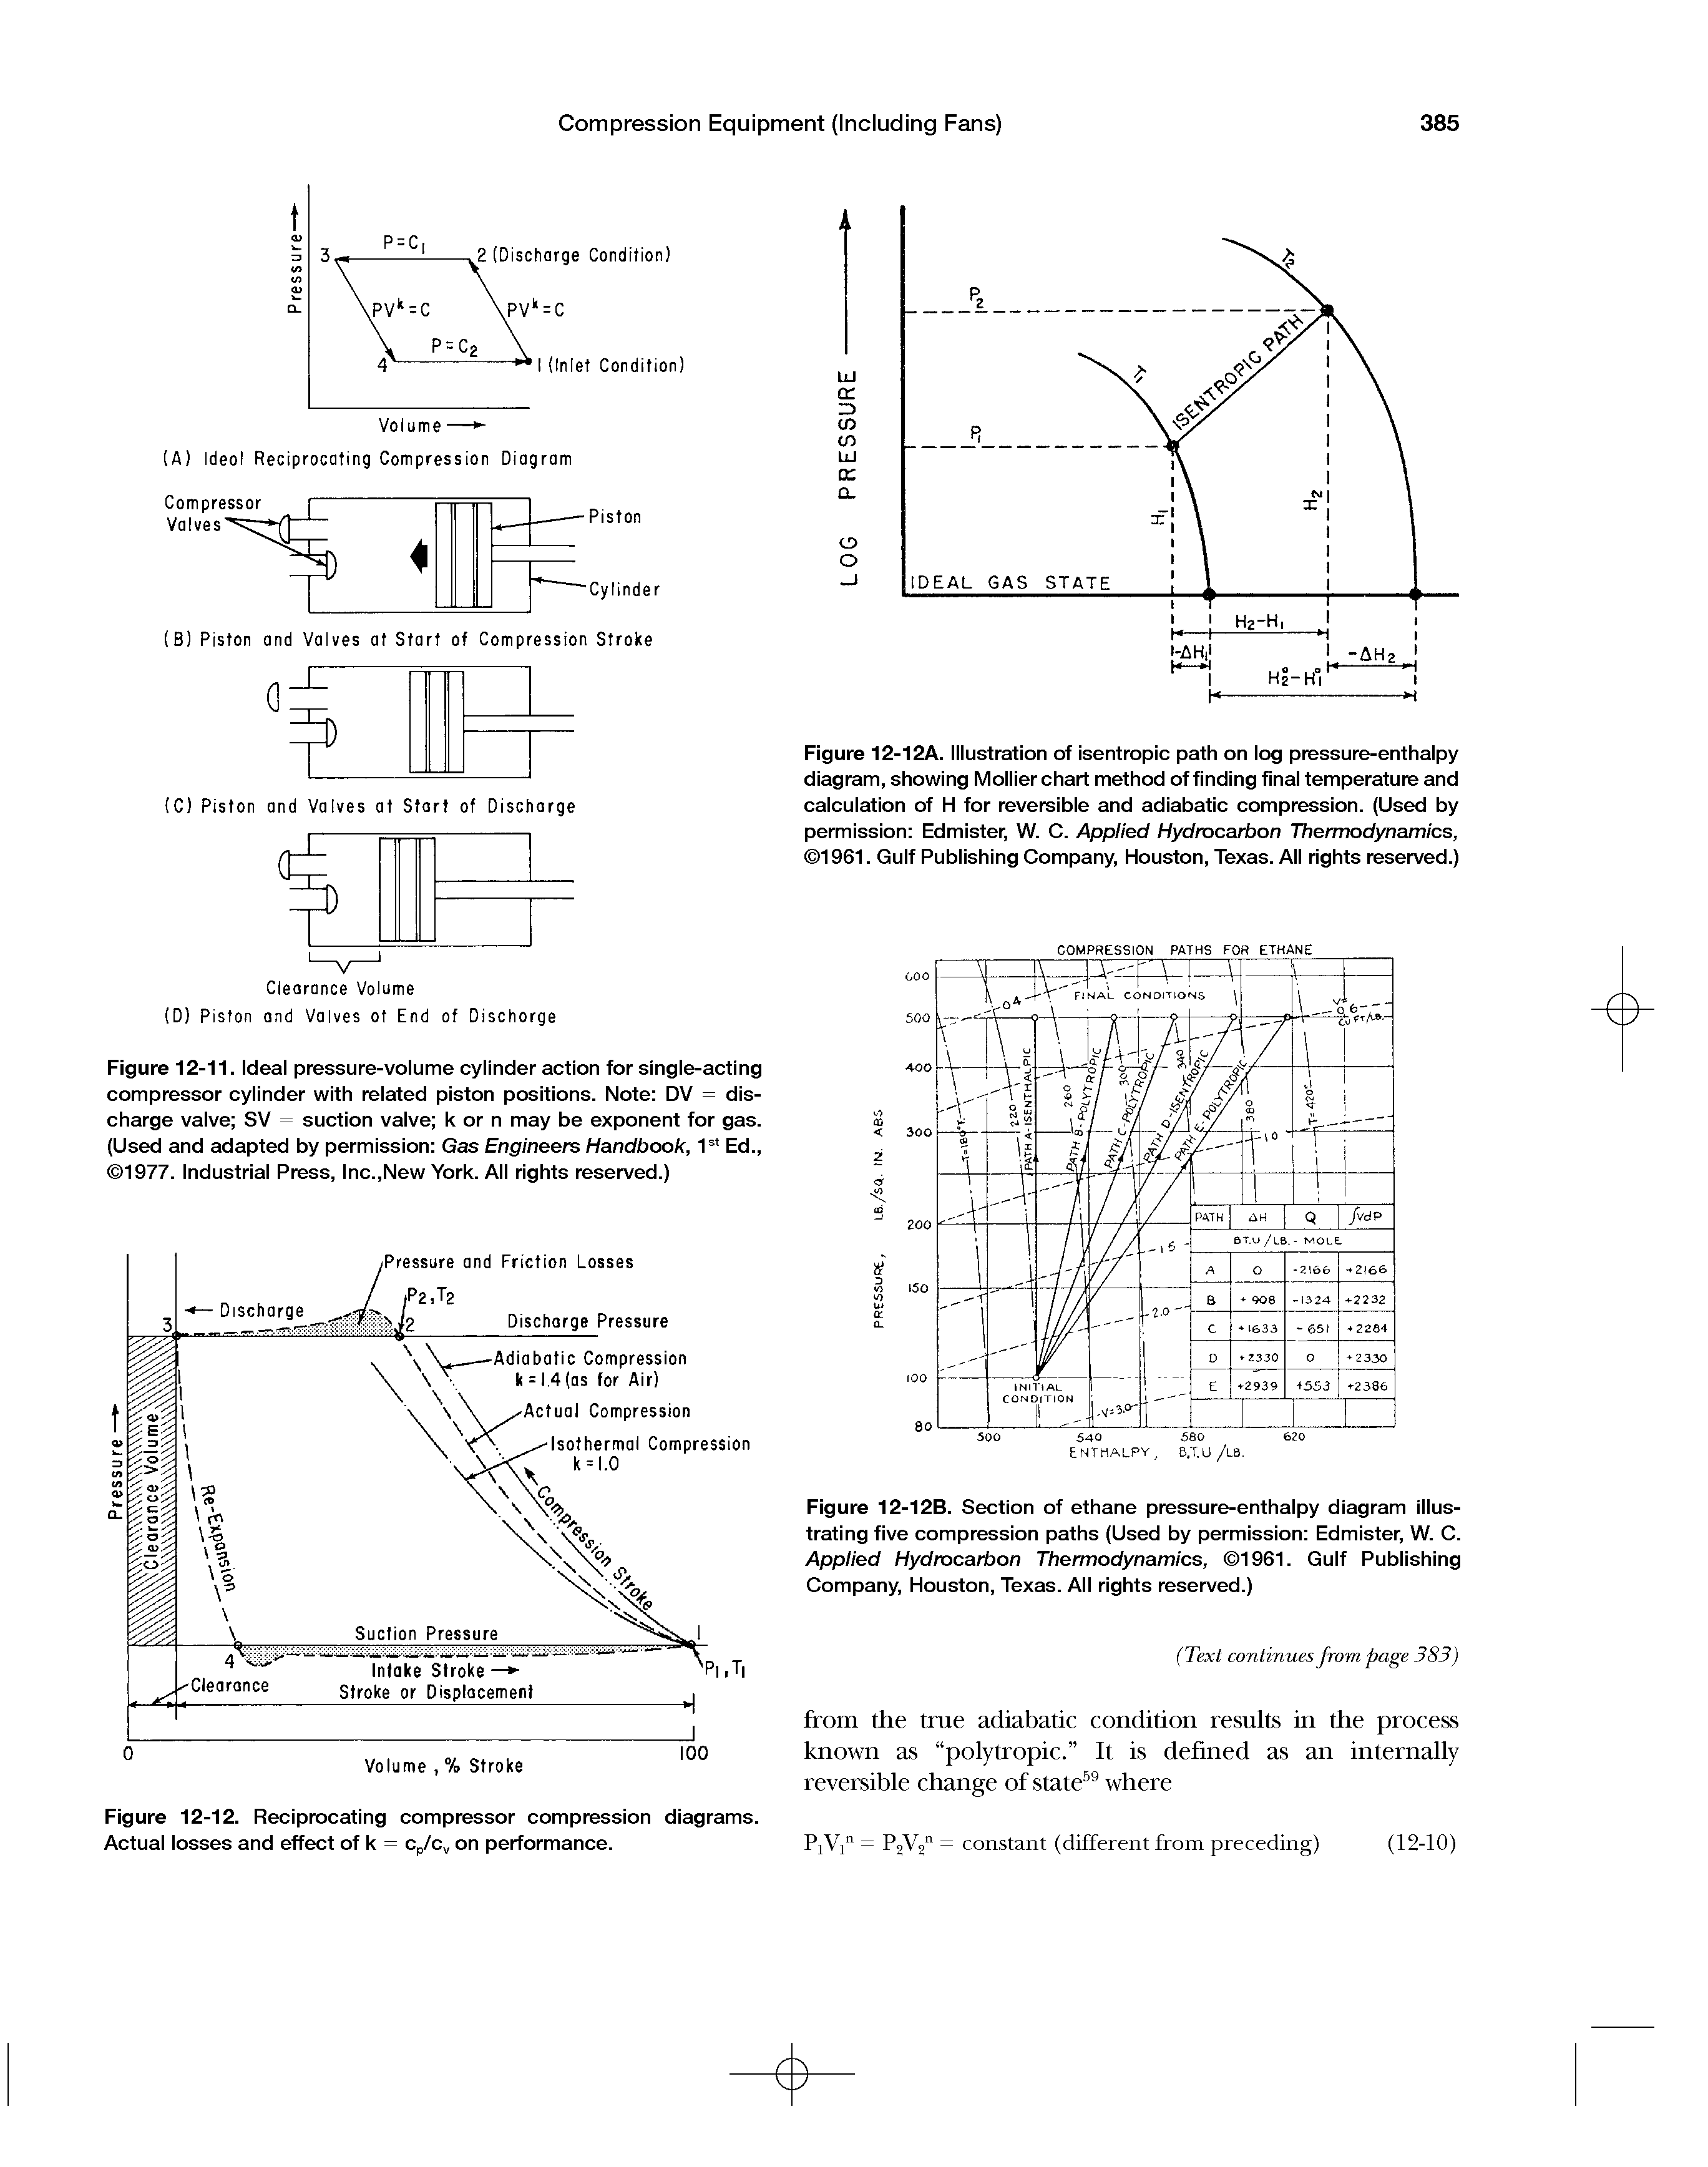 Figure 12-12A. Illustration of isentropic path on log pressure-enthalpy diagram, showing Mollier chart method of finding final temperature and calculation of H for reversible and adiabatic compression. (Used by permission Edmister, W. C. Applied Hydrocarbon Thermodynamics, 1961. Gulf Publishing Company, Houston, Texas. All rights reserved.)...